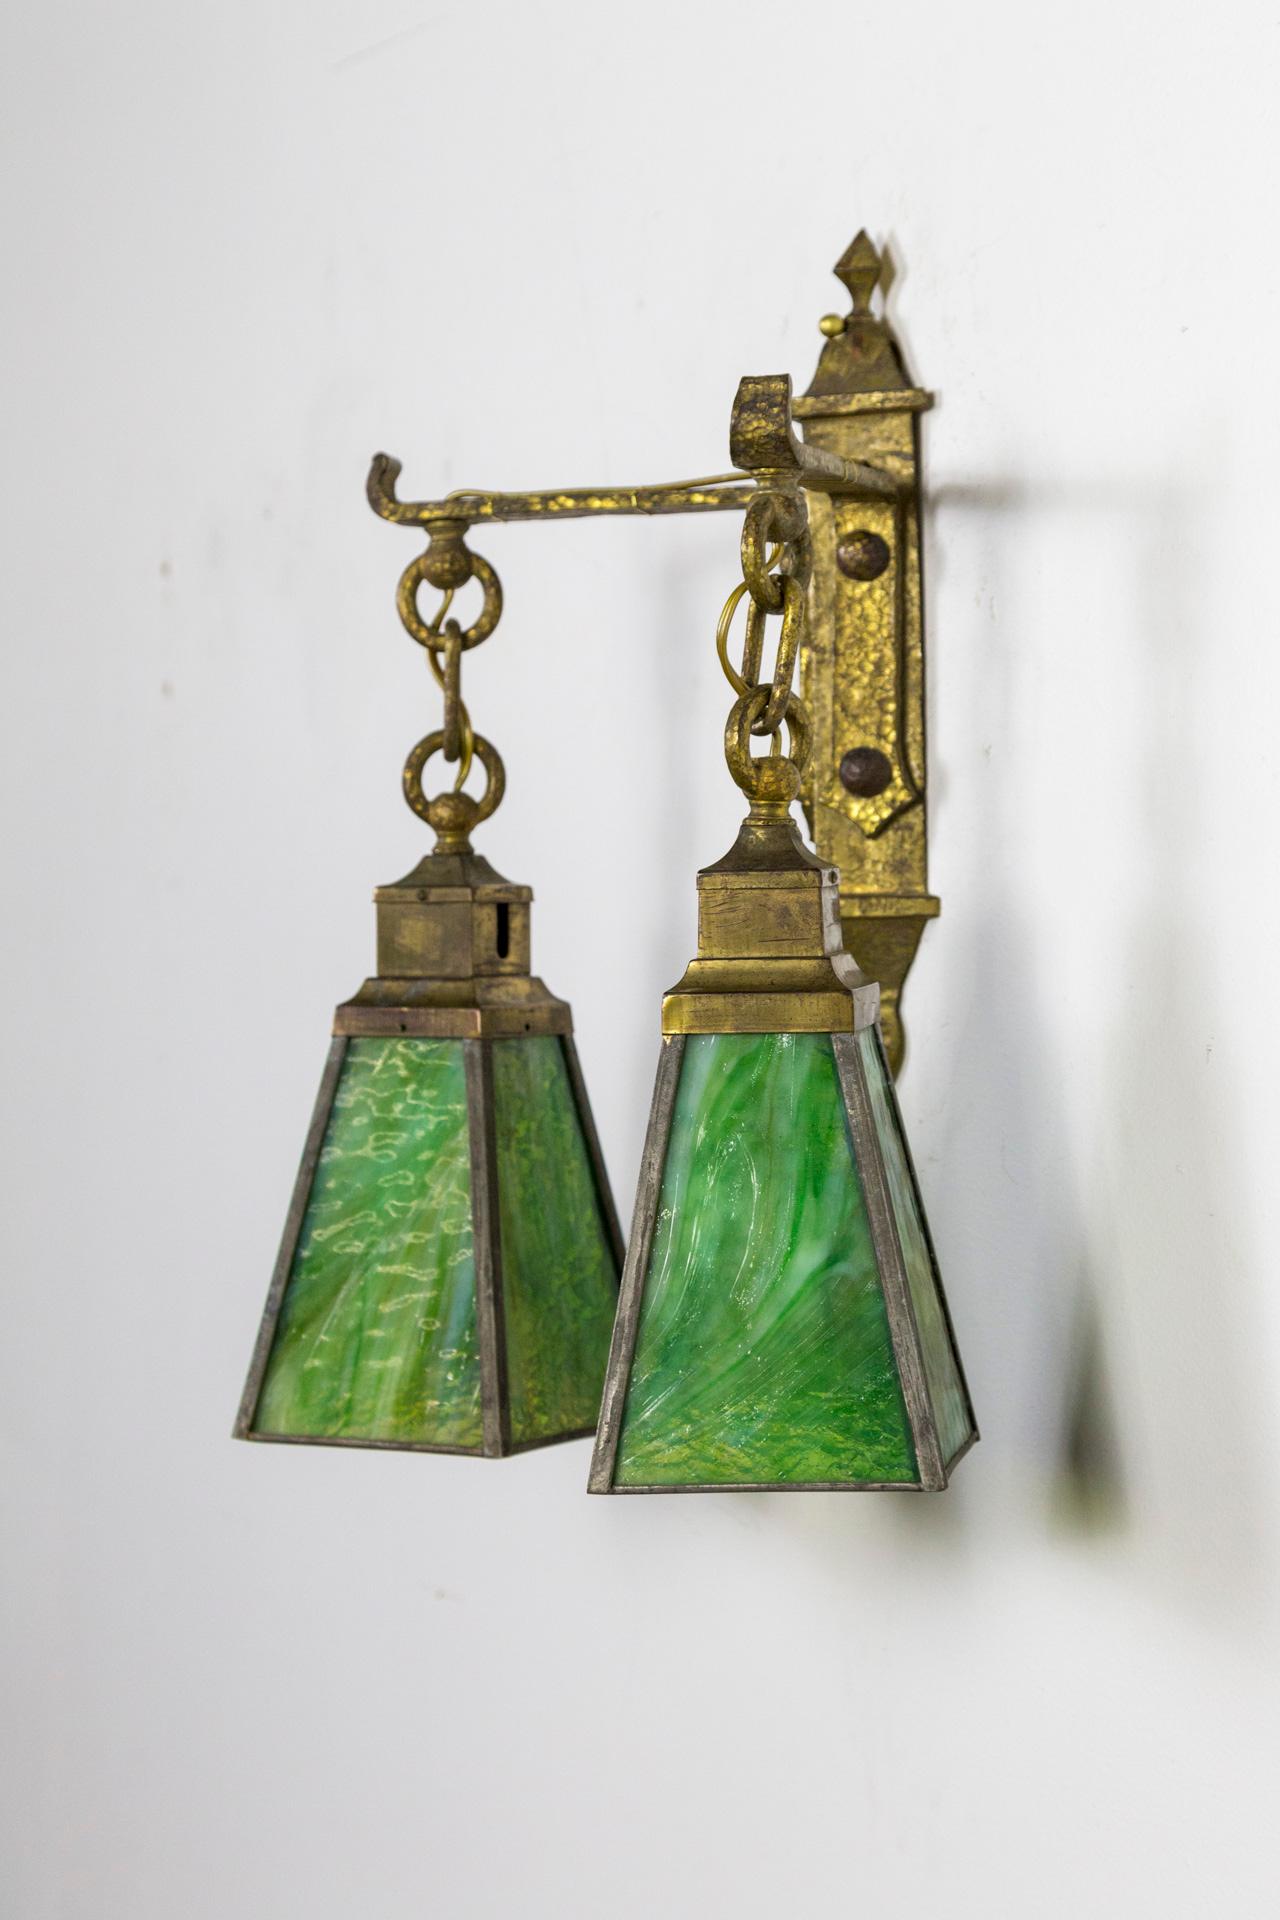 Hammered Arts & Crafts Period Two Light Sconce with Green Art Glass Shades